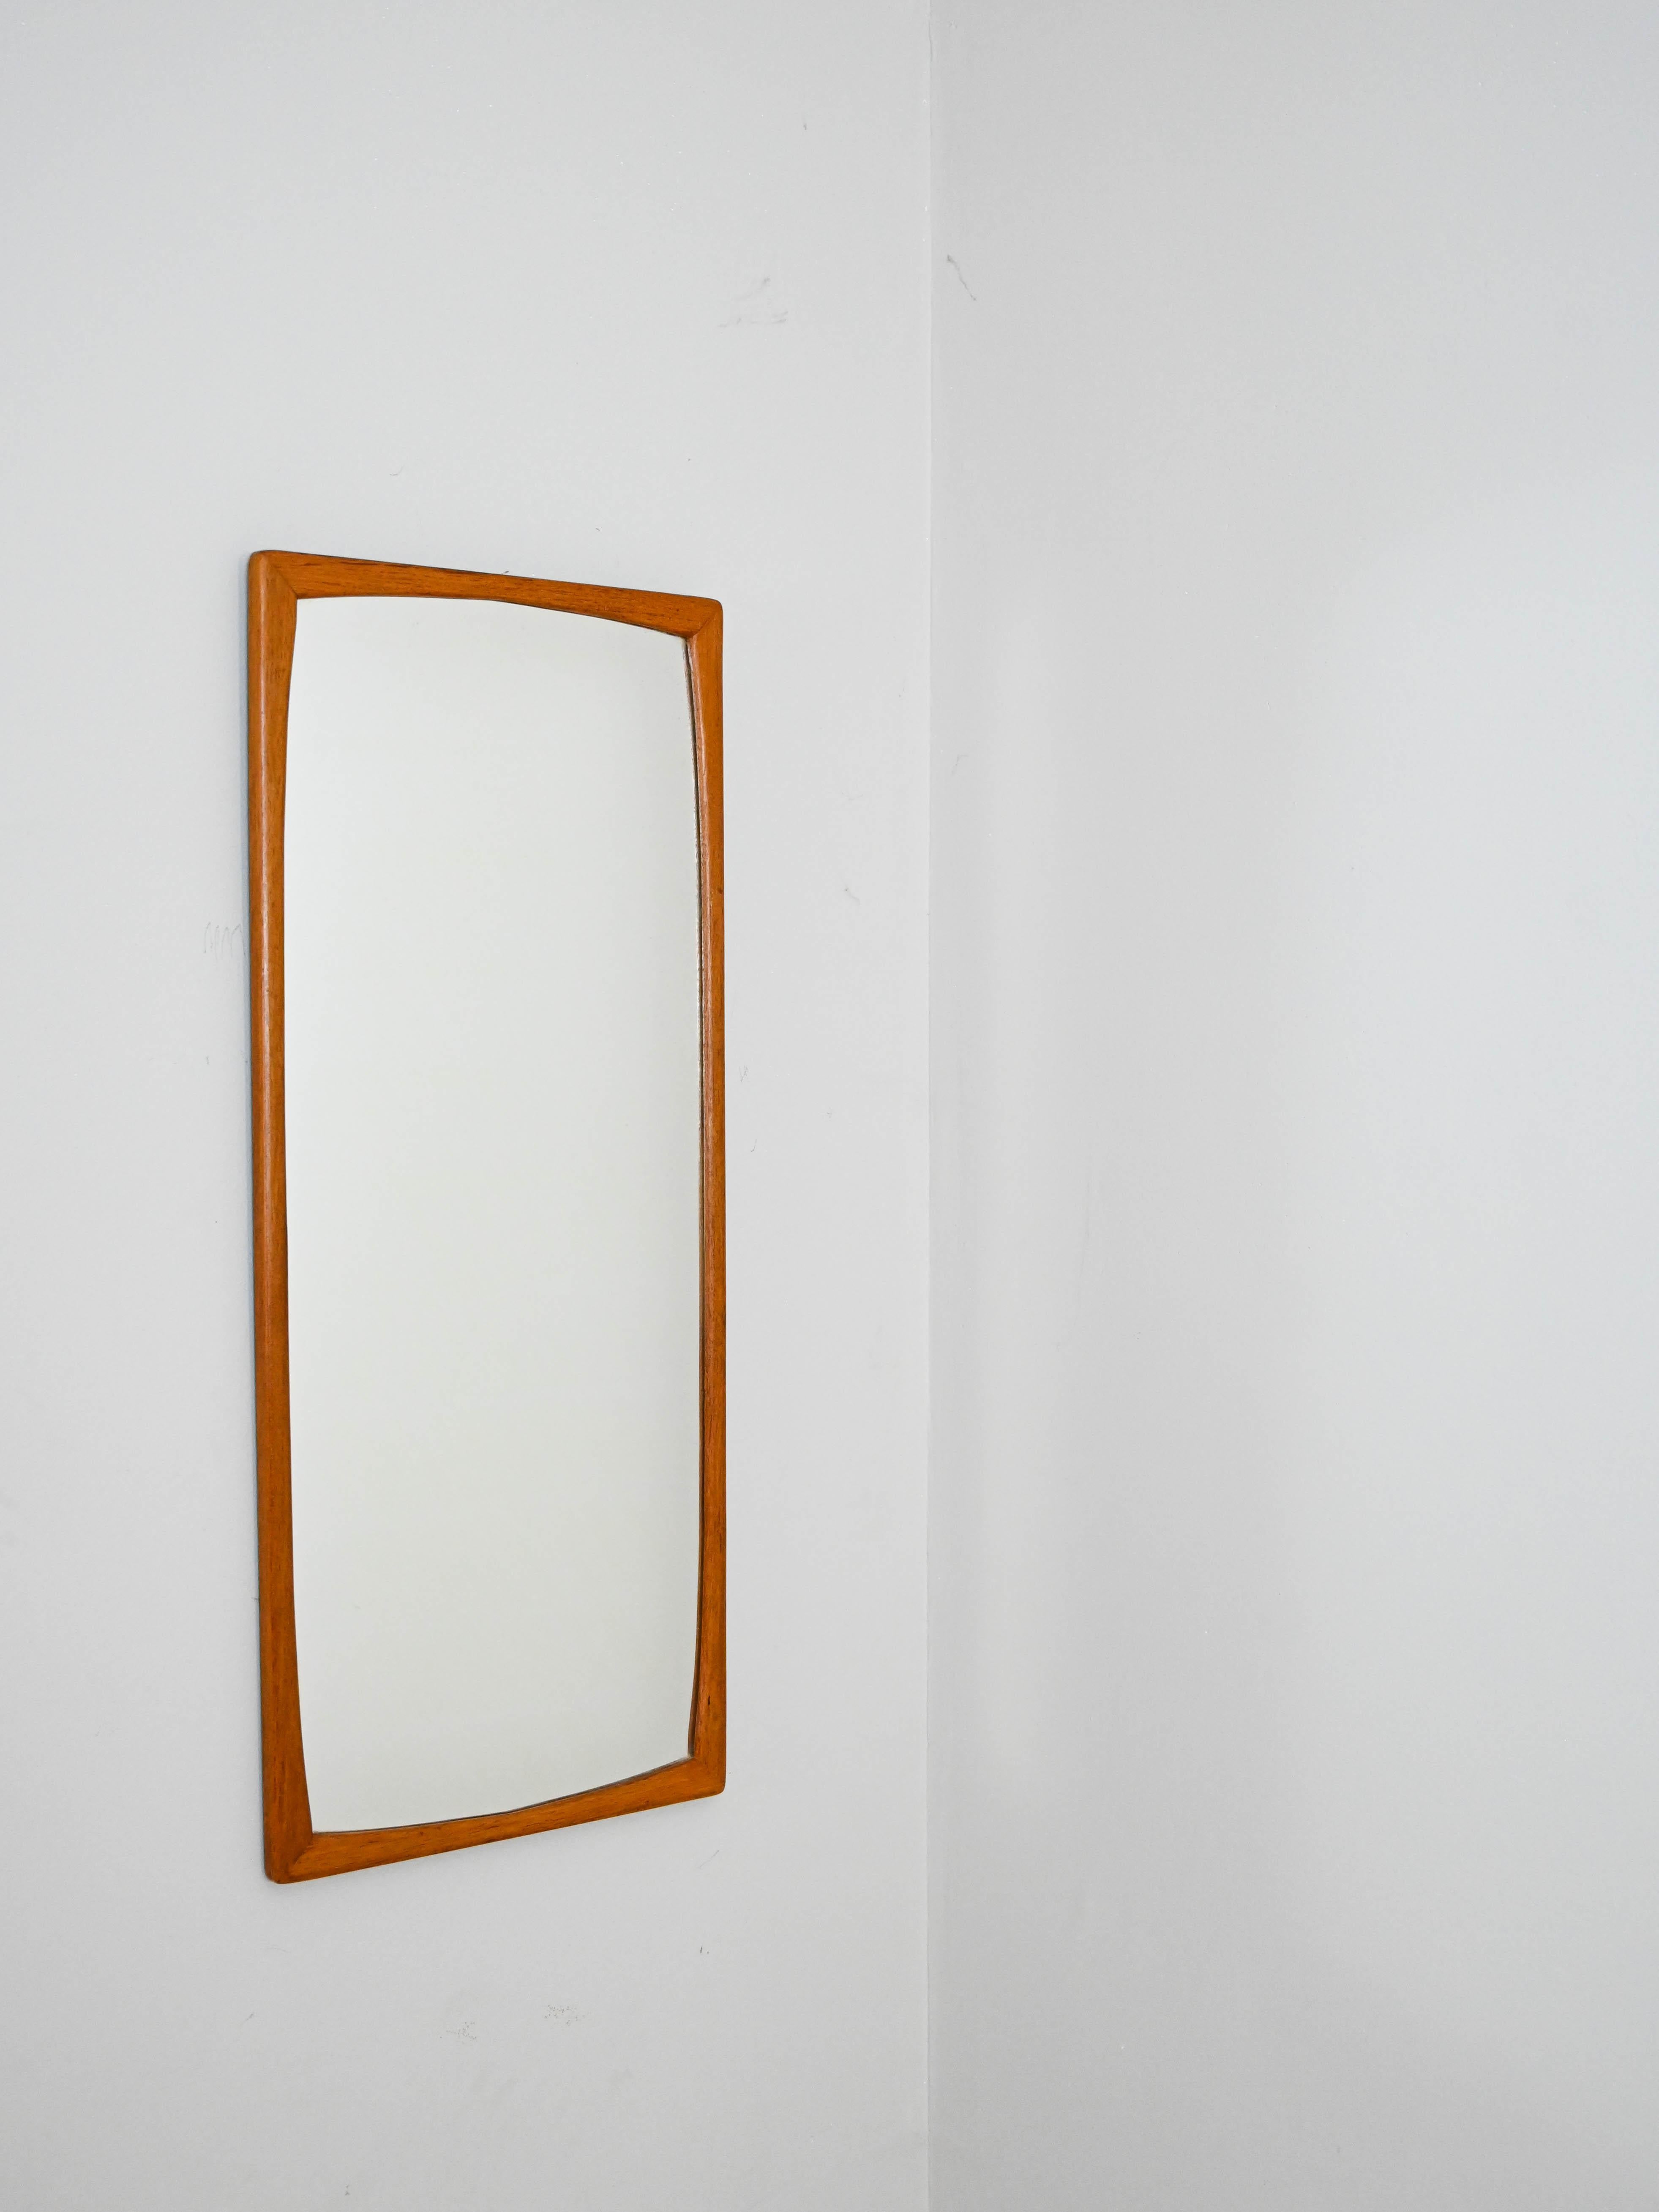 Scandinavian rectangular mirror from the 1960s.

This mirror is distinguished by the shape of the slightly convex frame on the inside, which gives it a distinctive and elegant look.
Perfect for any room, try it in the entryway with a small table or